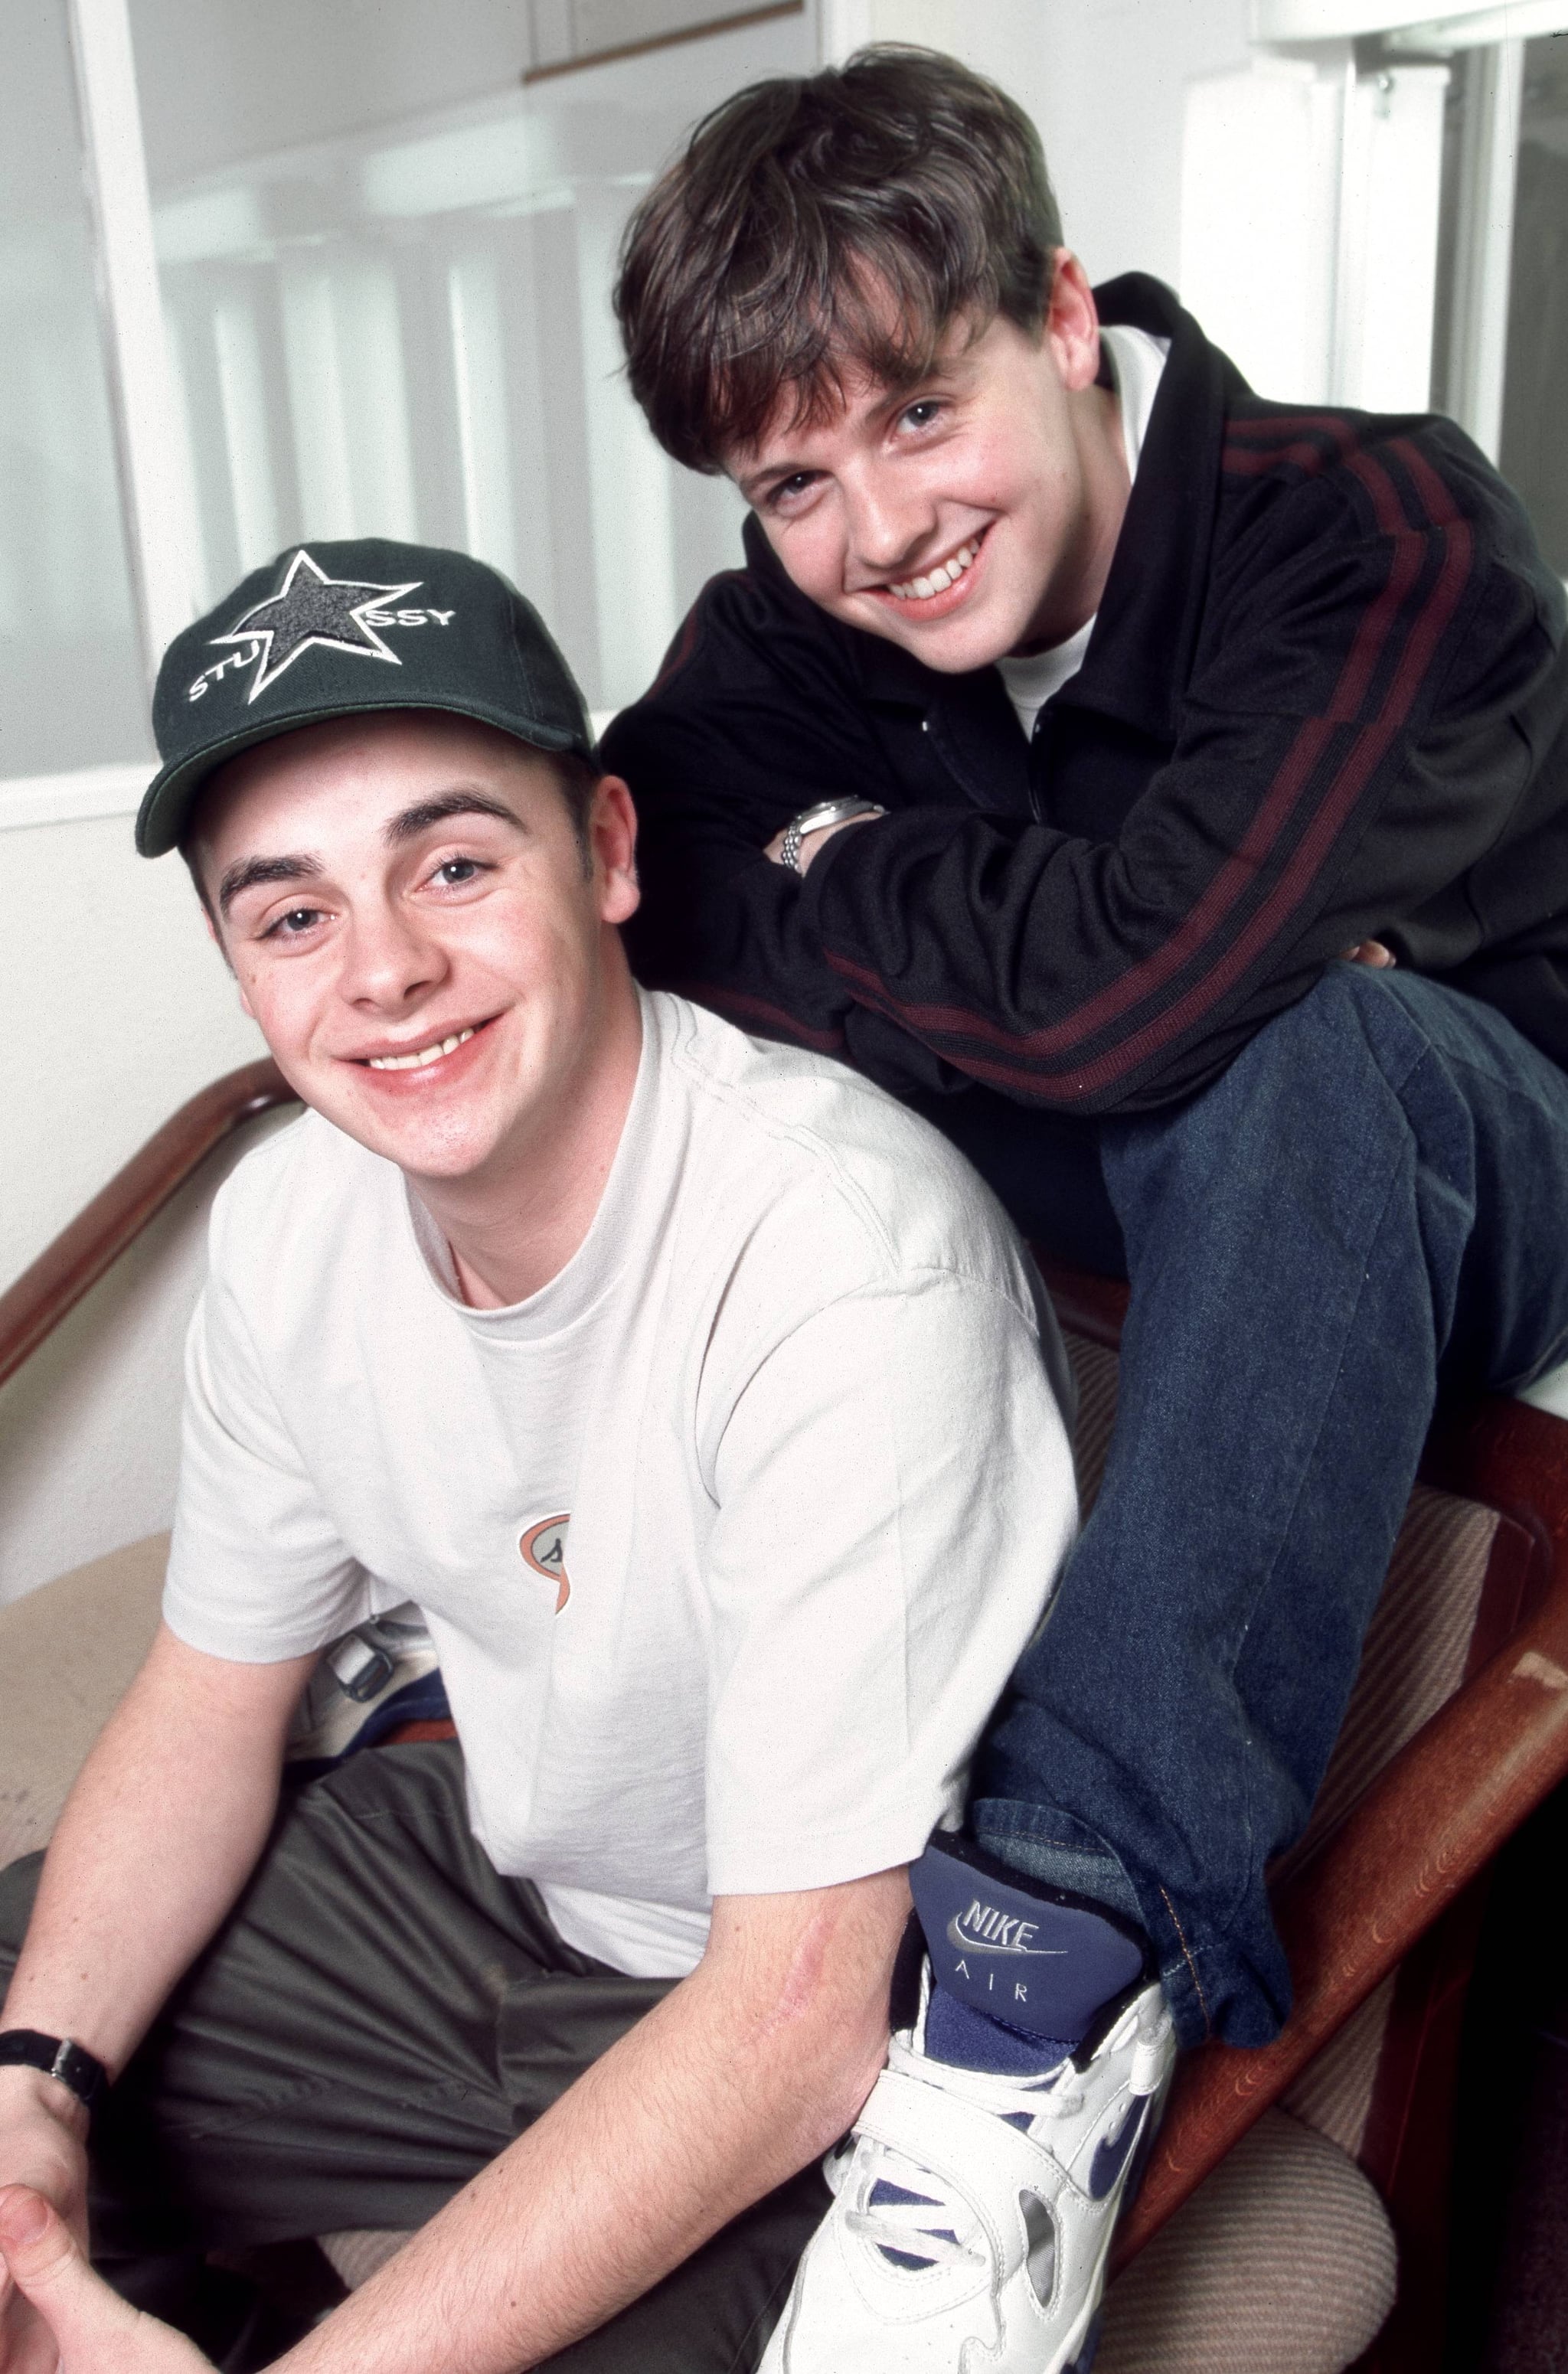 UNSPECIFIED - JANUARY 01:  Photo of ANT & DEC and PJ & DUNCAN; Posed portrait of Anthony McPartlin (PJ) and Declan Donnelly (Duncan)  (Photo by Mick Hutson/Redferns)